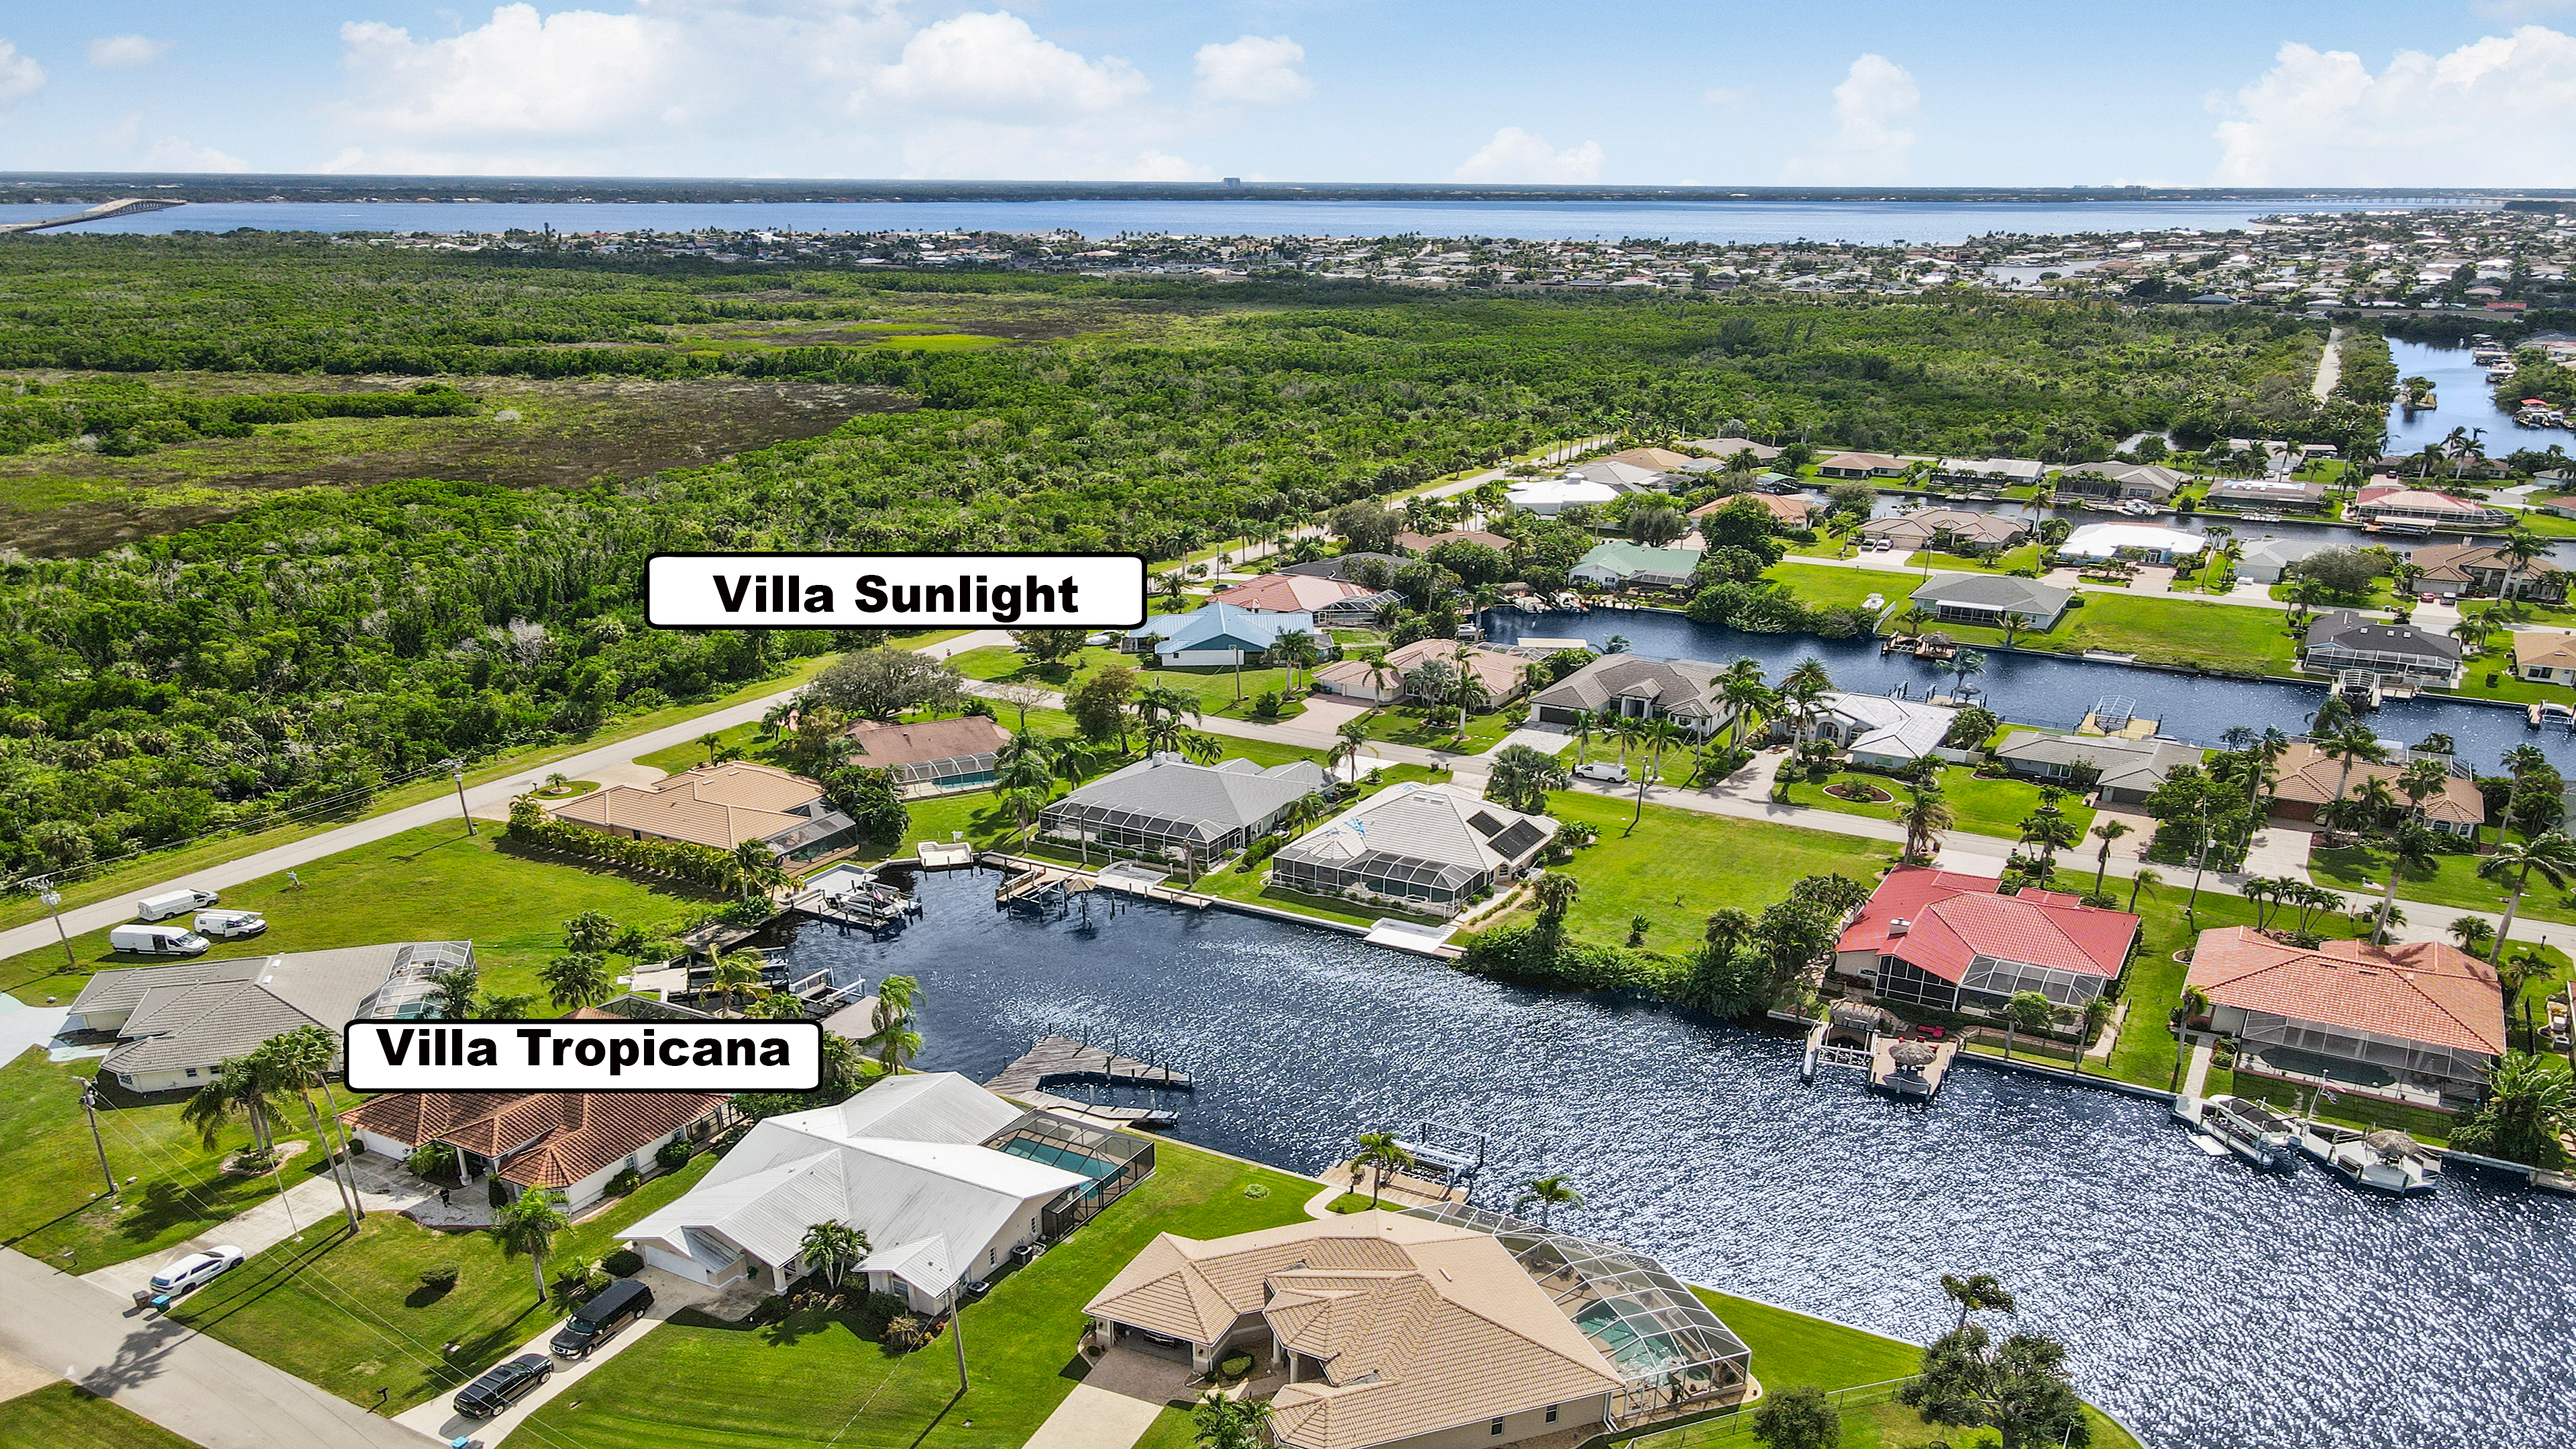 View of Villa Tropicana and Villa Sunlight from above